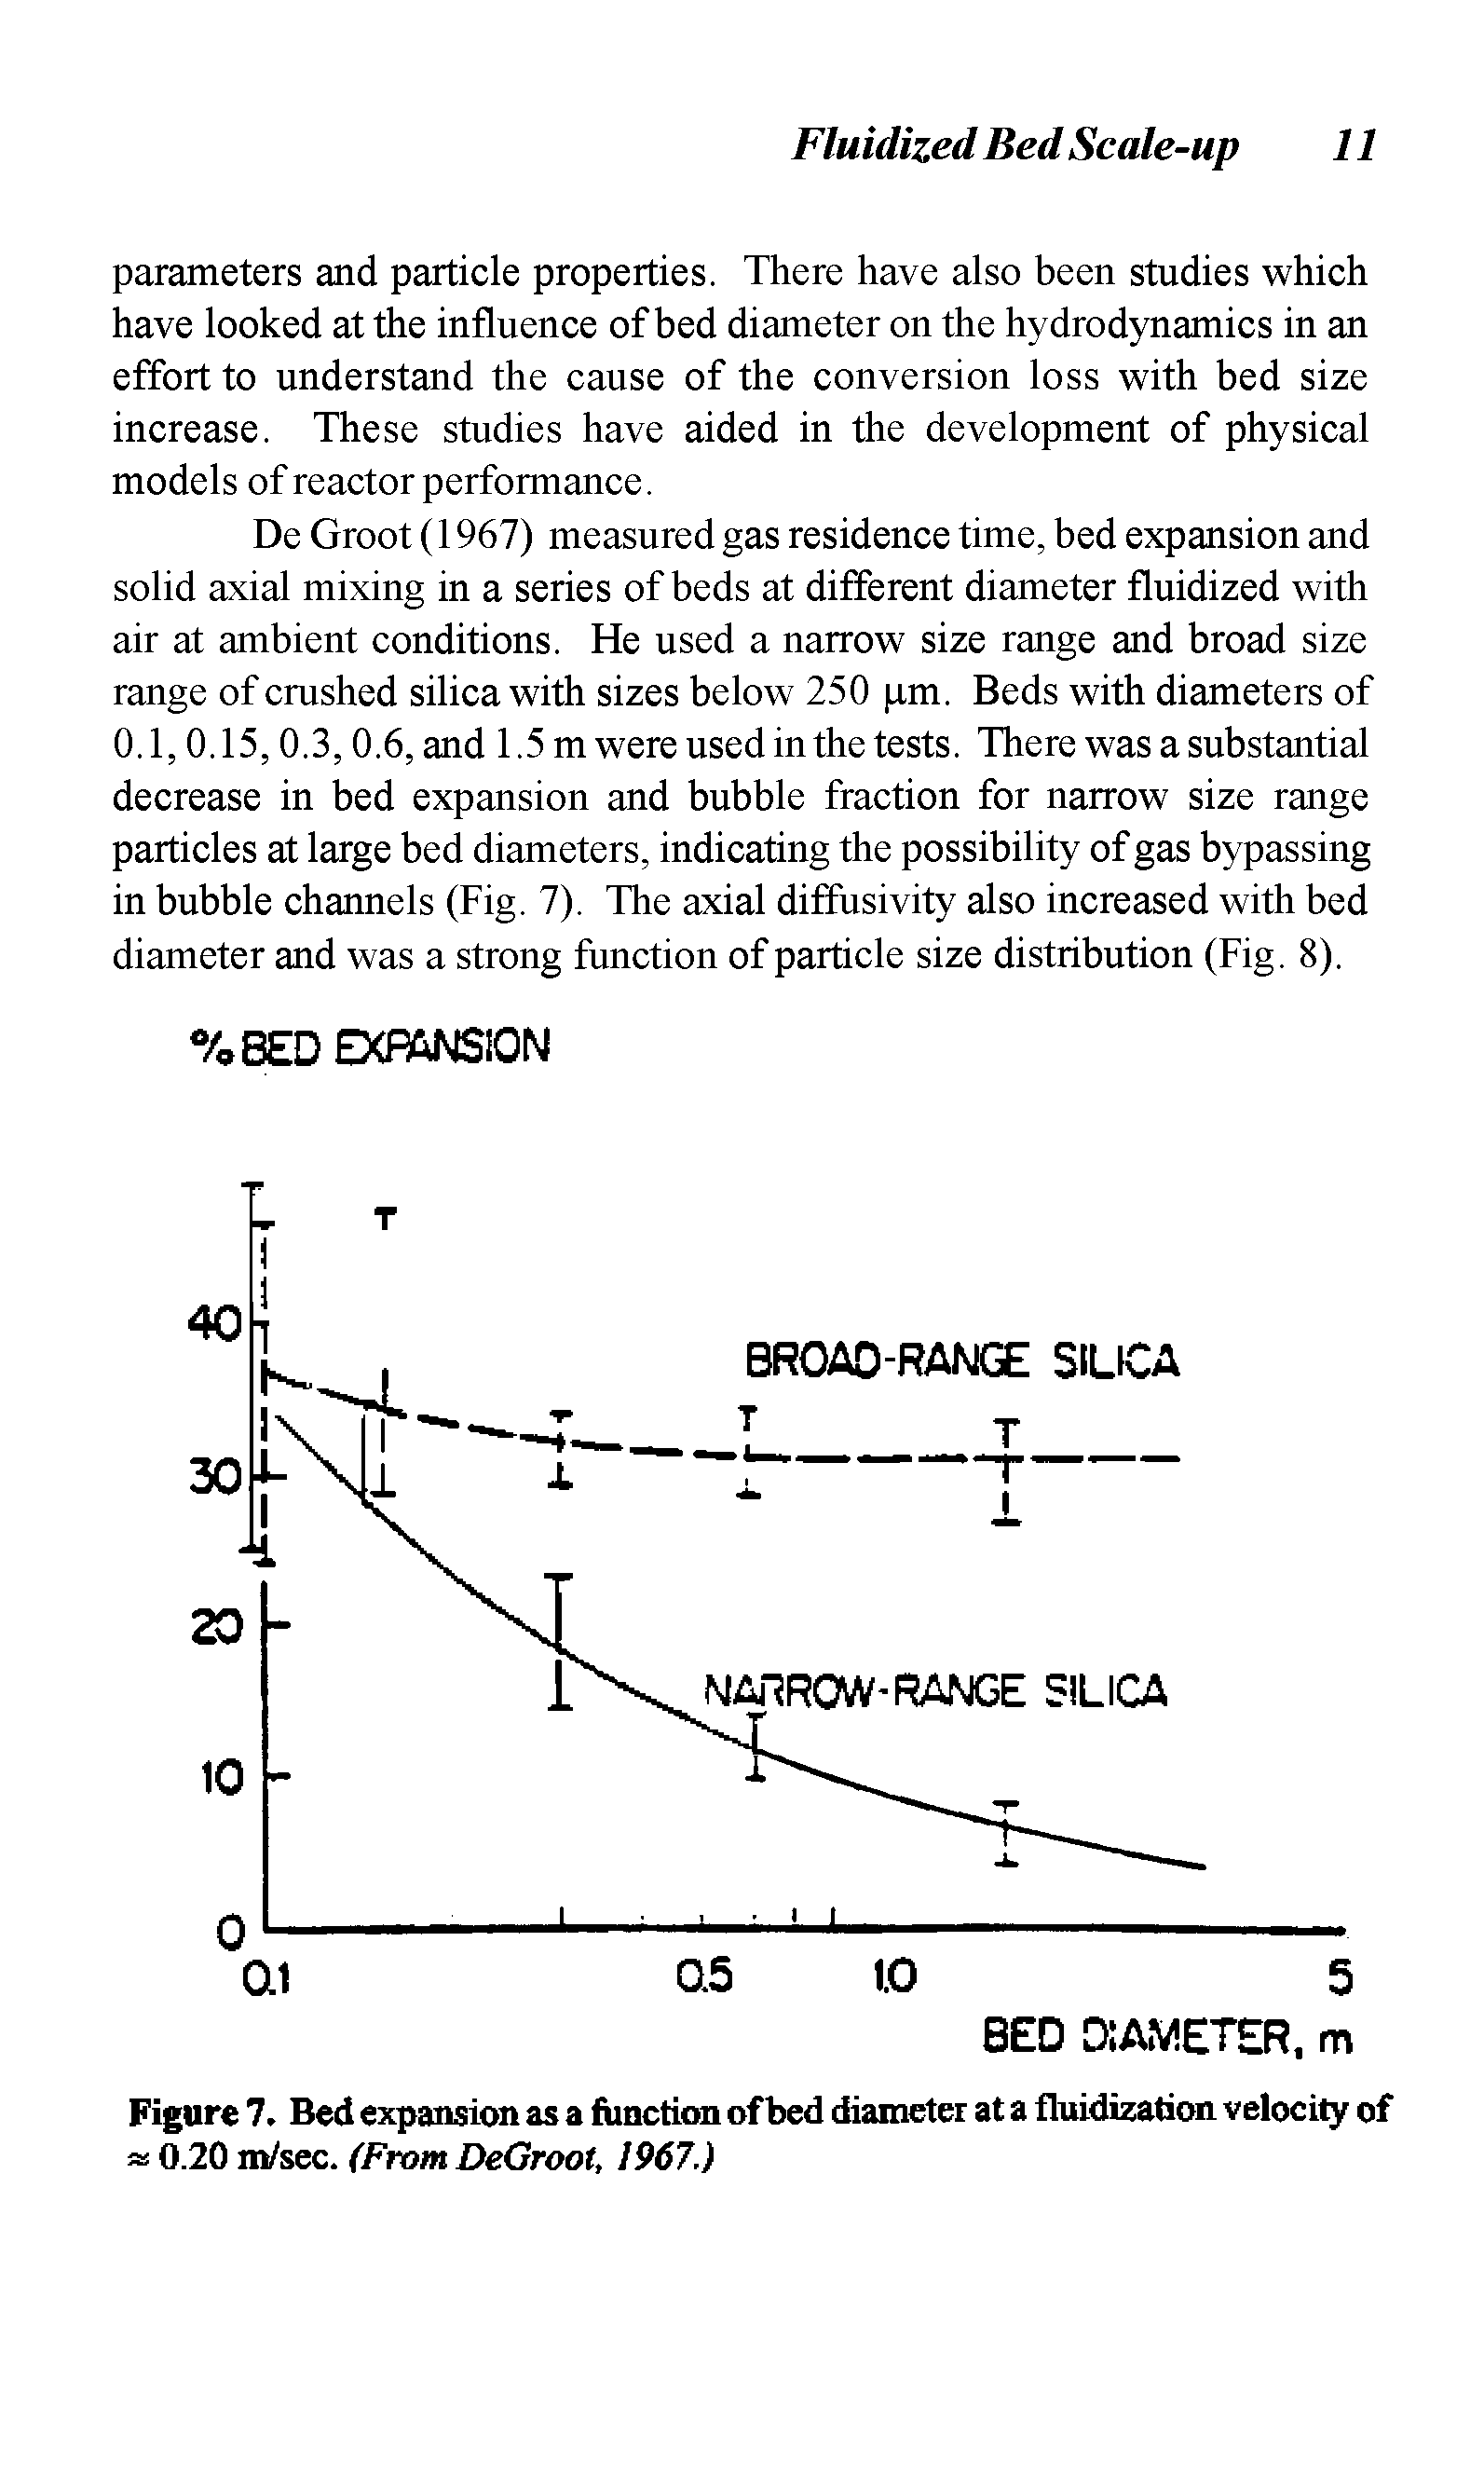 Figure 7. Bed expansion as a function of bed diameter at a fluidization velocity of 0.20 m/sec. (From DeGroot, 1967.)...